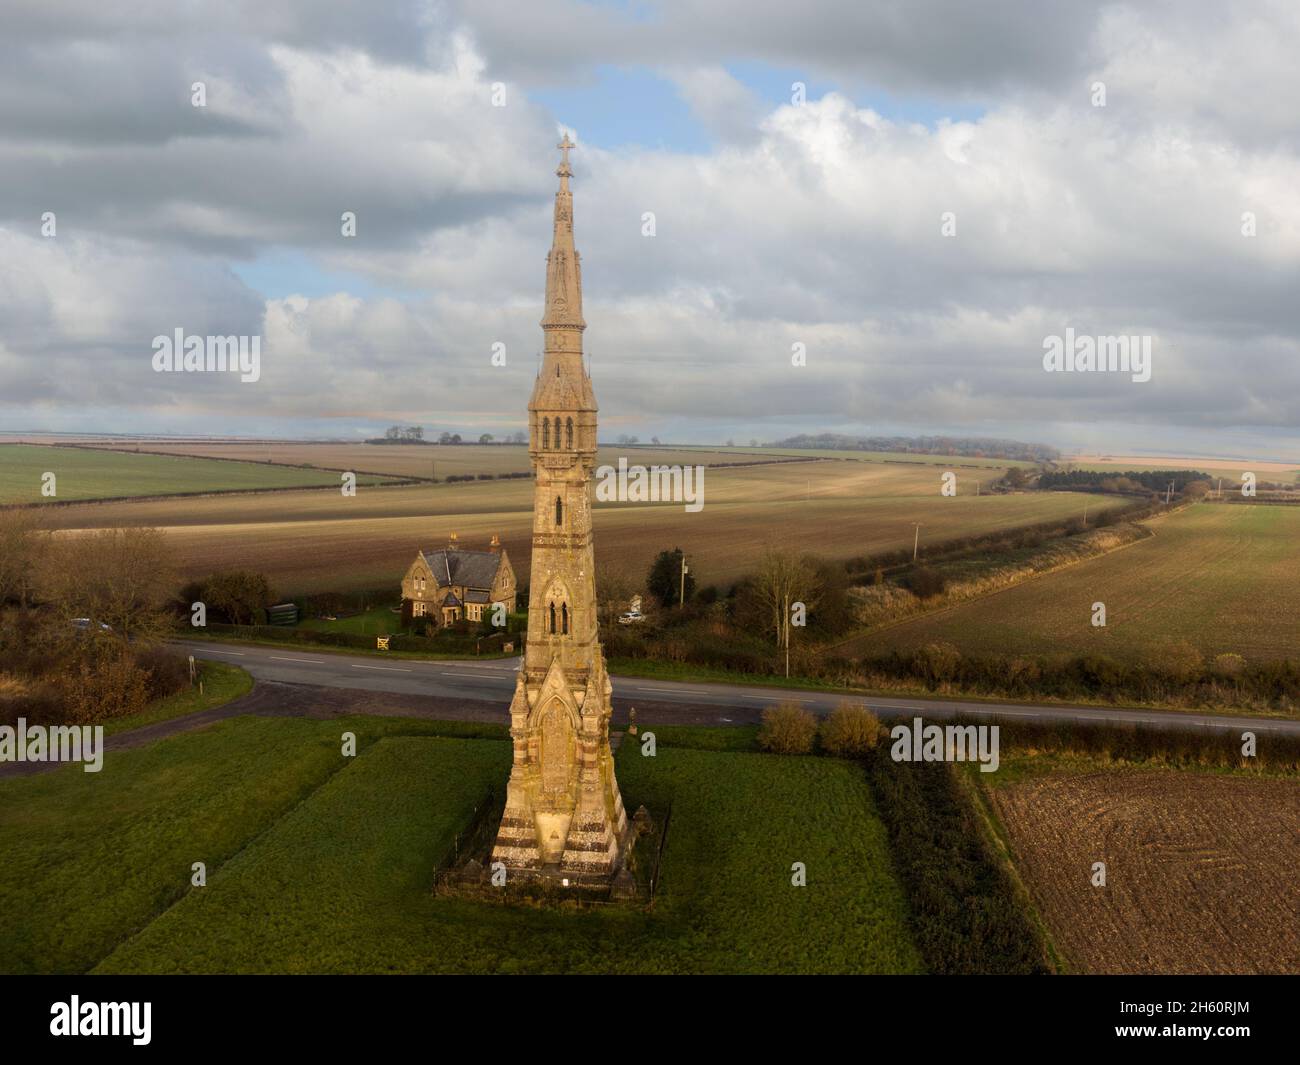 Sledmere Monument, Sledmere, East Riding of Yorkshire, Royaume-Uni Banque D'Images